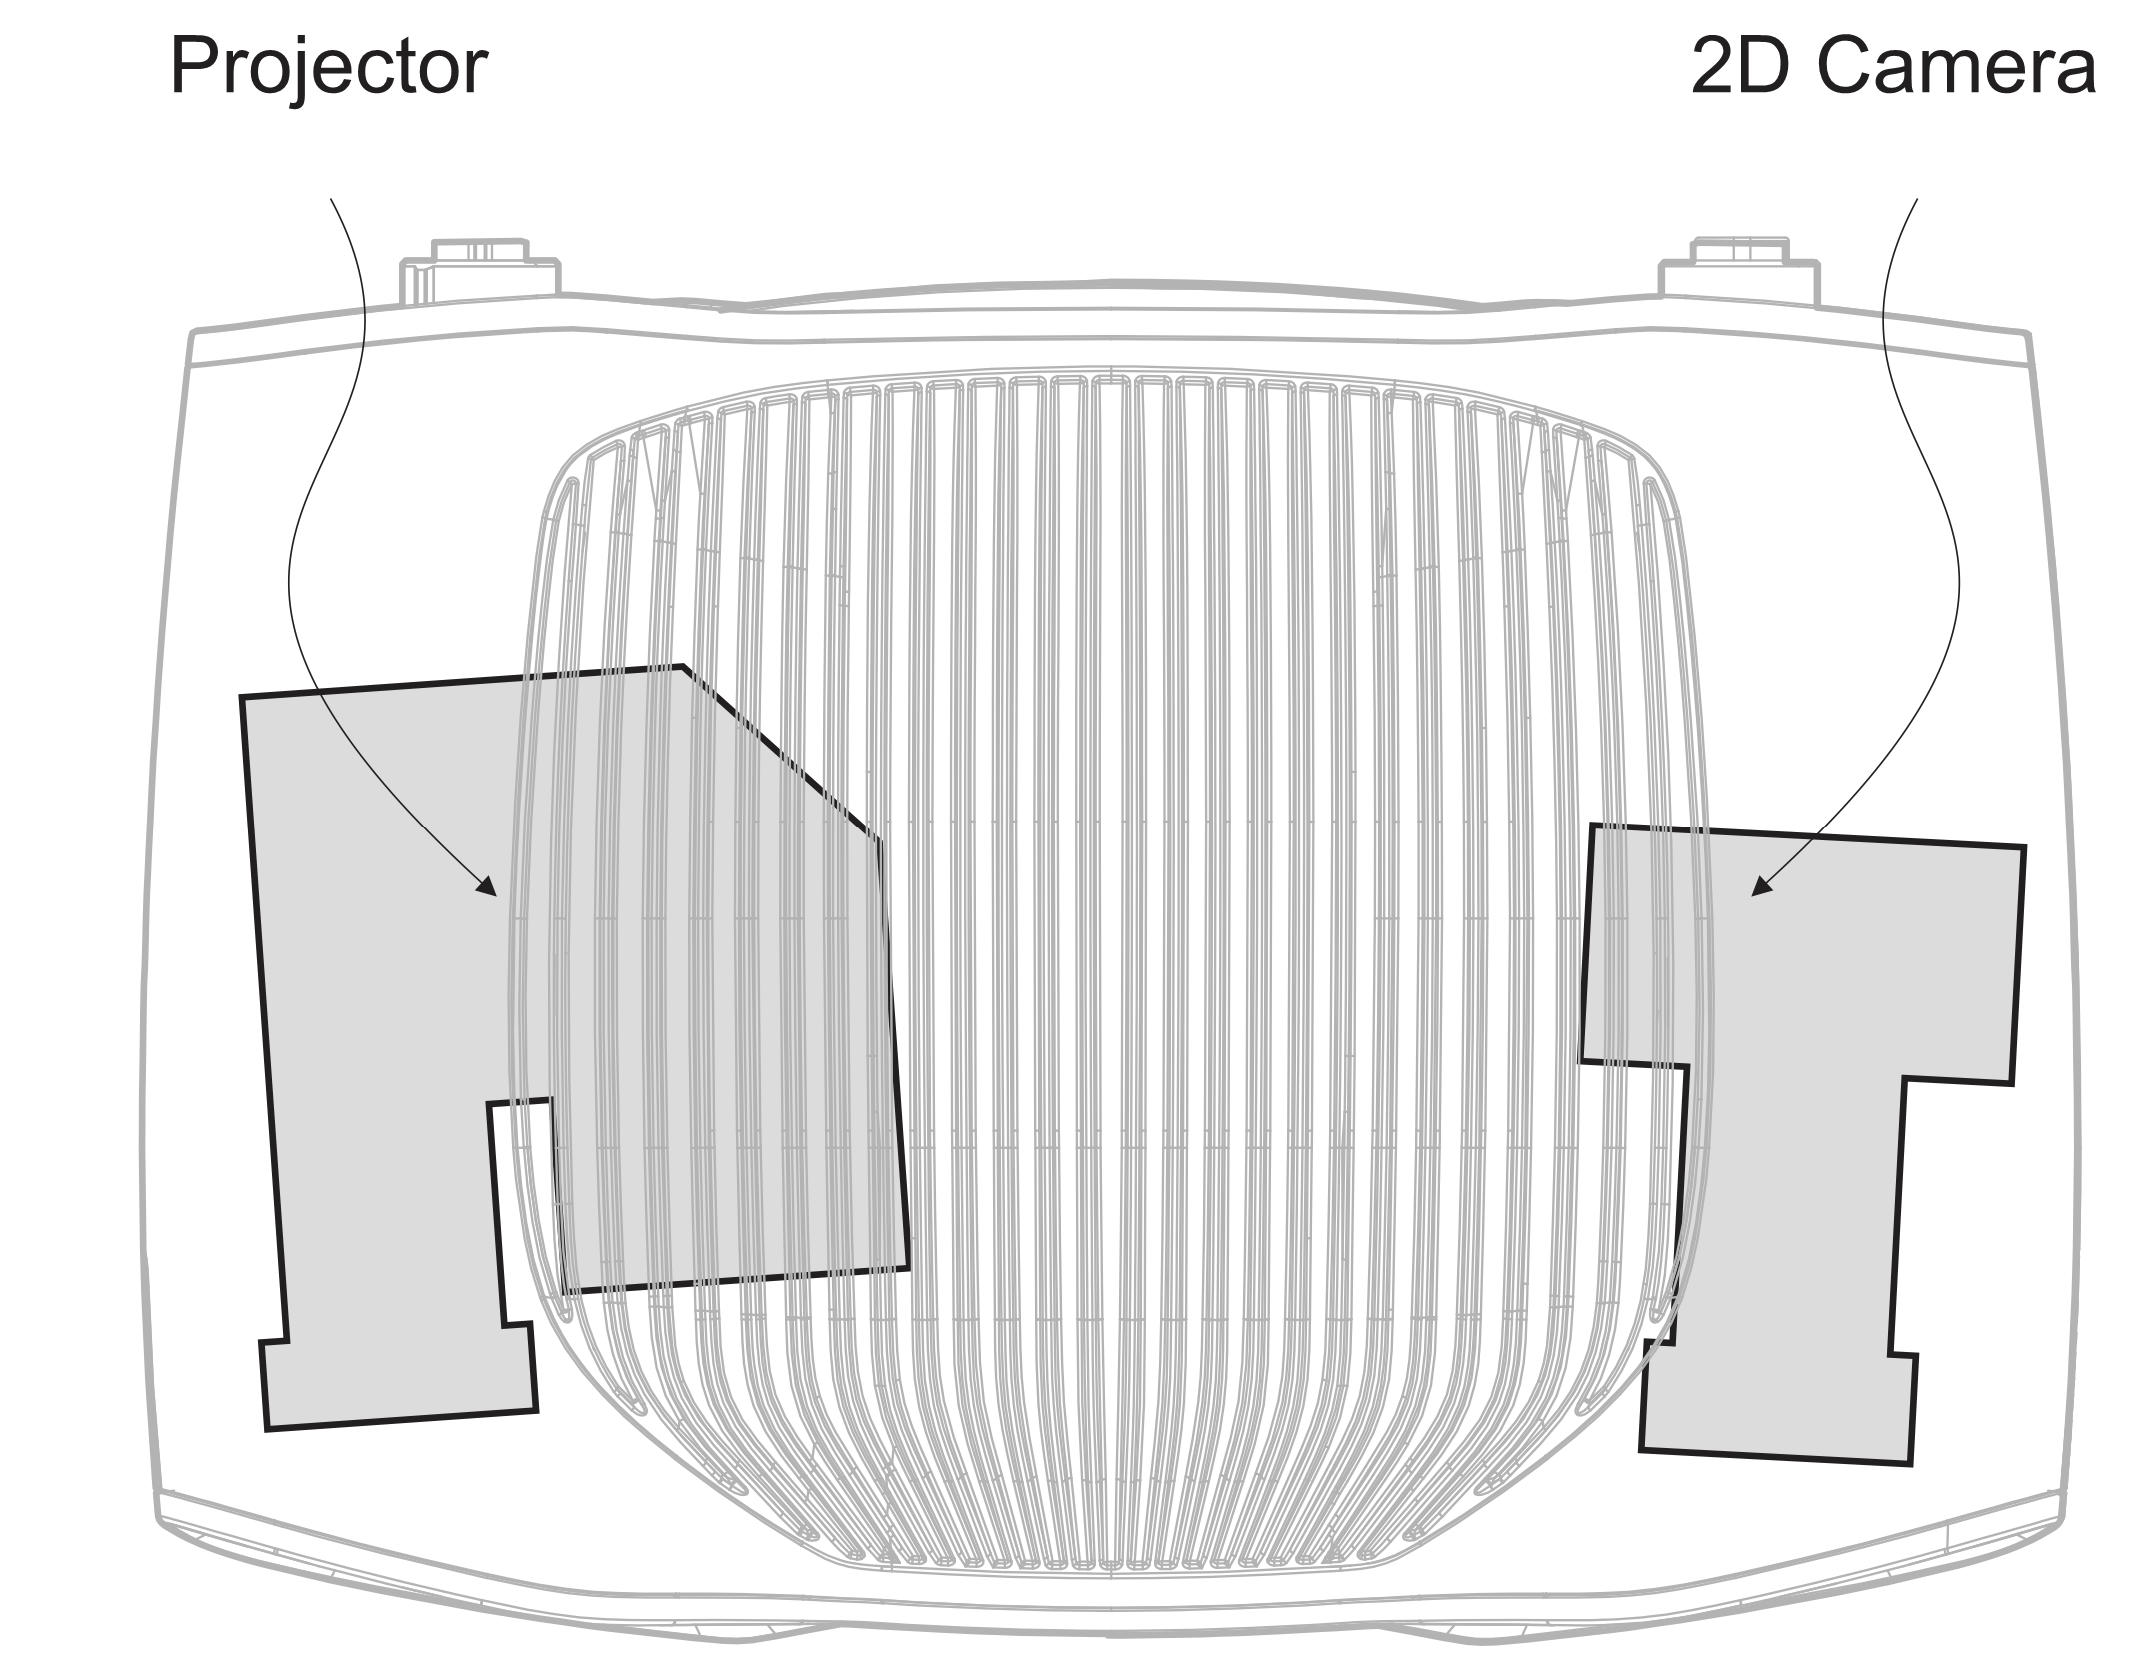 Sketch of Zivid 2 and where the projector and 2D camera is located.